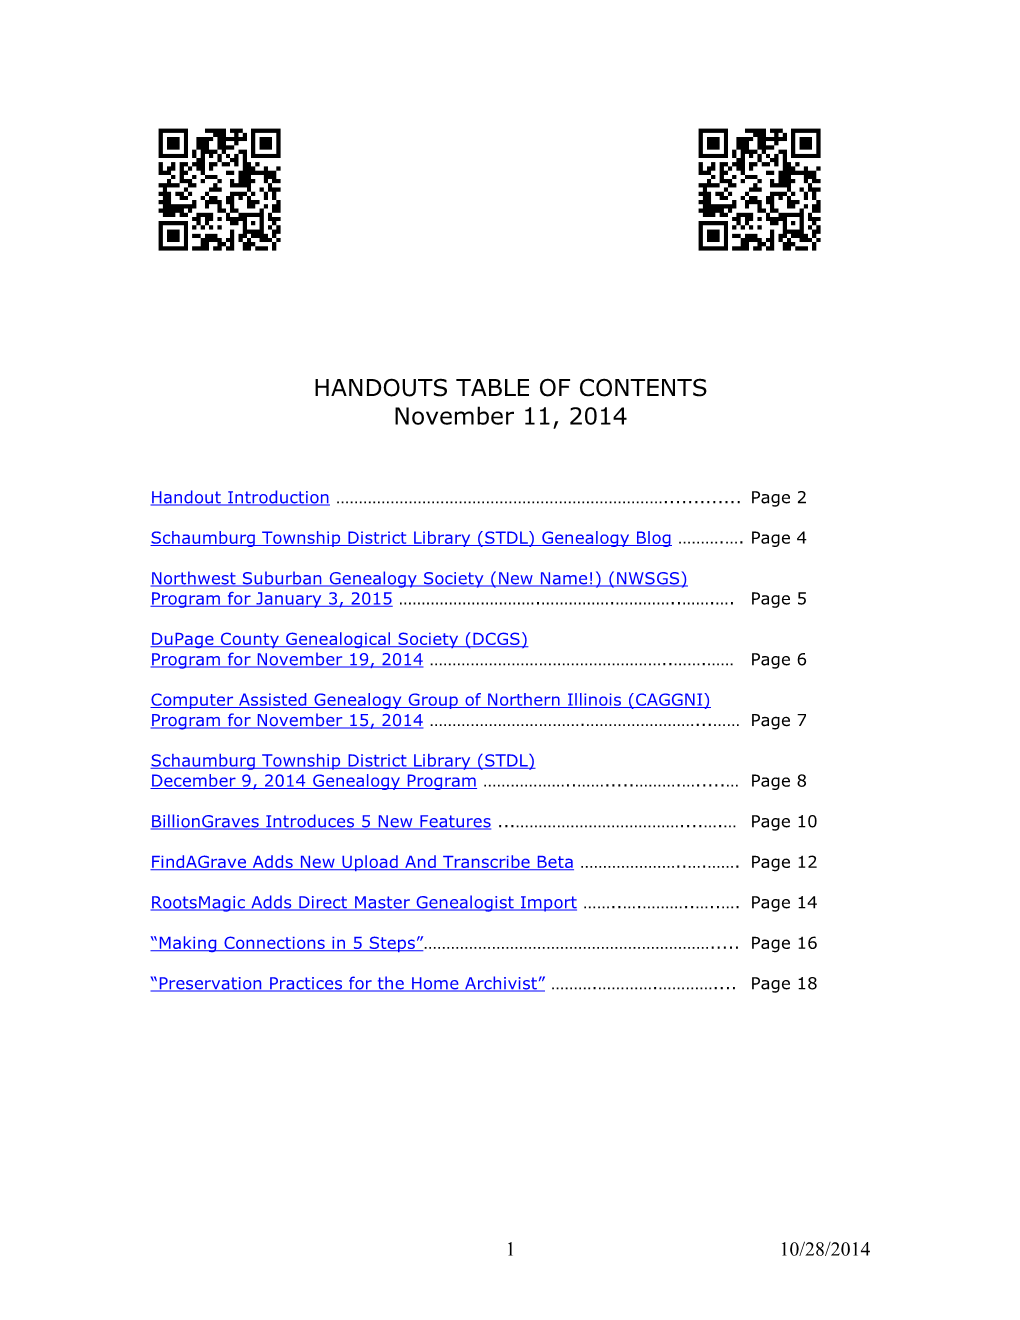 HANDOUTS TABLE of CONTENTS November 11, 2014